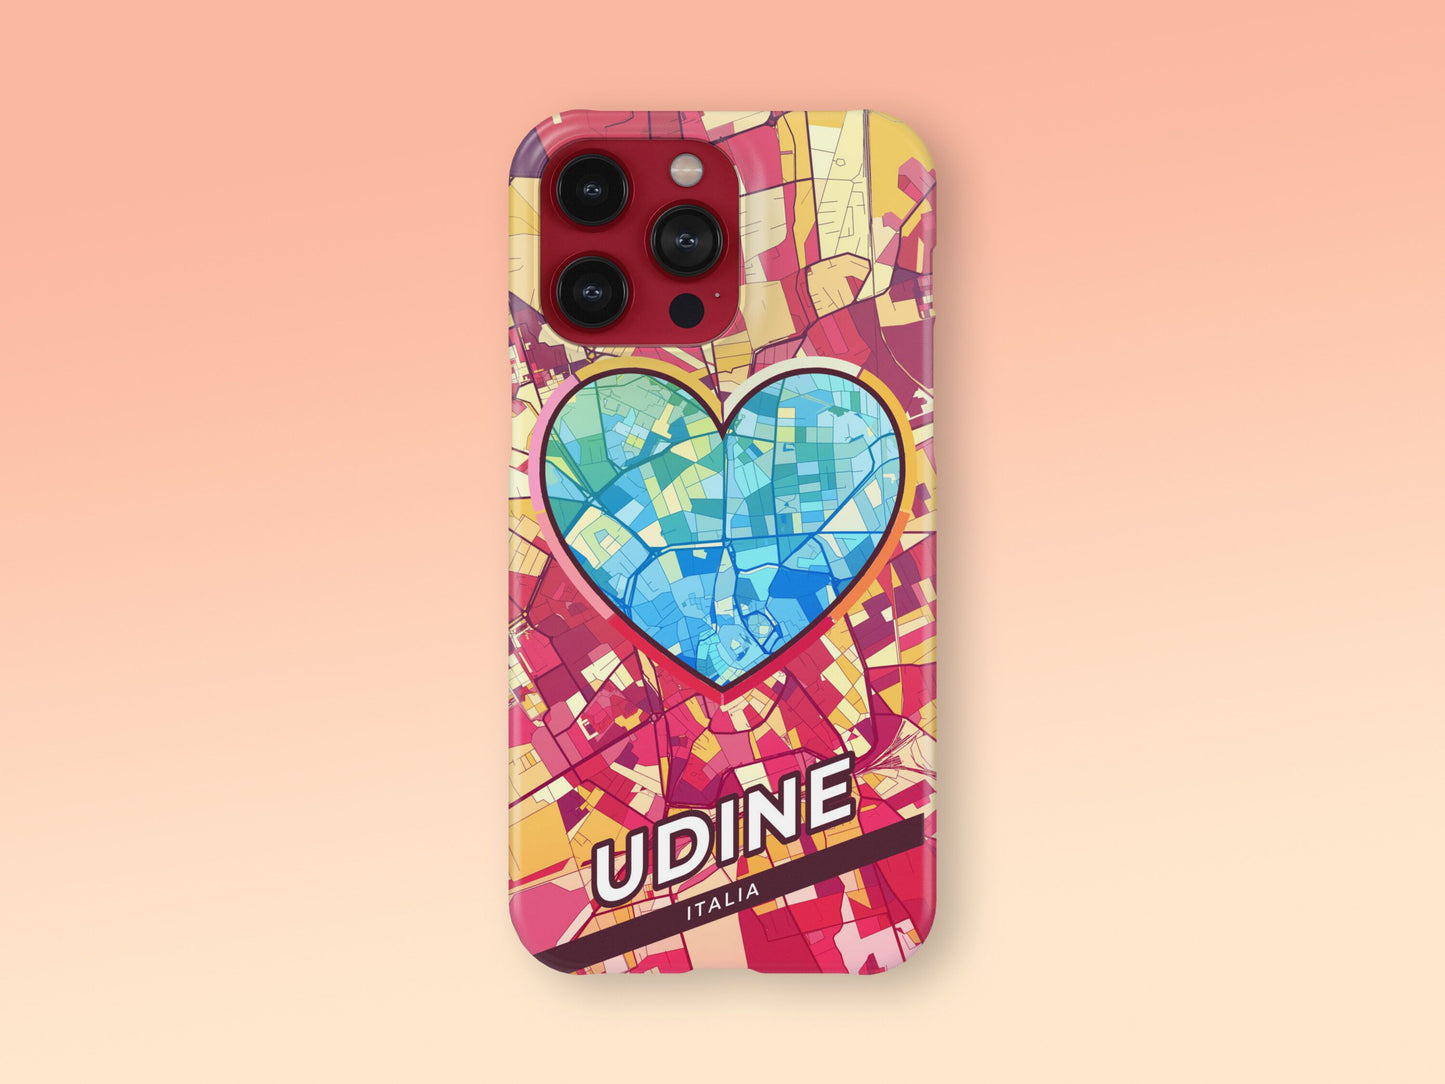 Udine Italy slim phone case with colorful icon 2